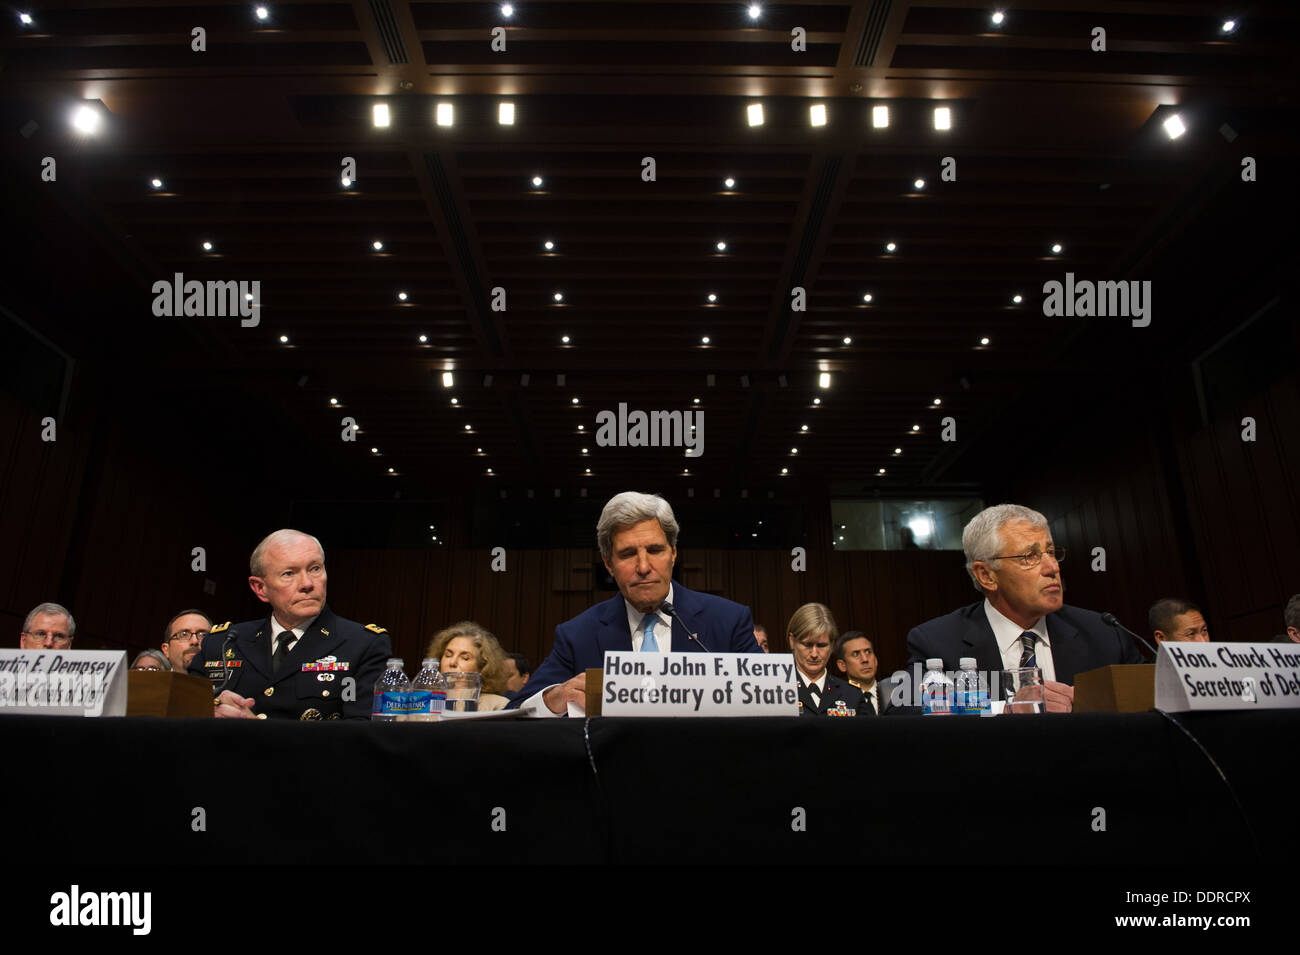 Chairman of the Joint Chiefs of Staff Martin E. Dempsey, Secretary of State John Kerry and Secretary of Defense Chuck Hagel look on during a Senate Foreign Relations Committee hearing at the Hart Senate Office building in Washington D.C. Sept. 3, 2013. Pr Stock Photo